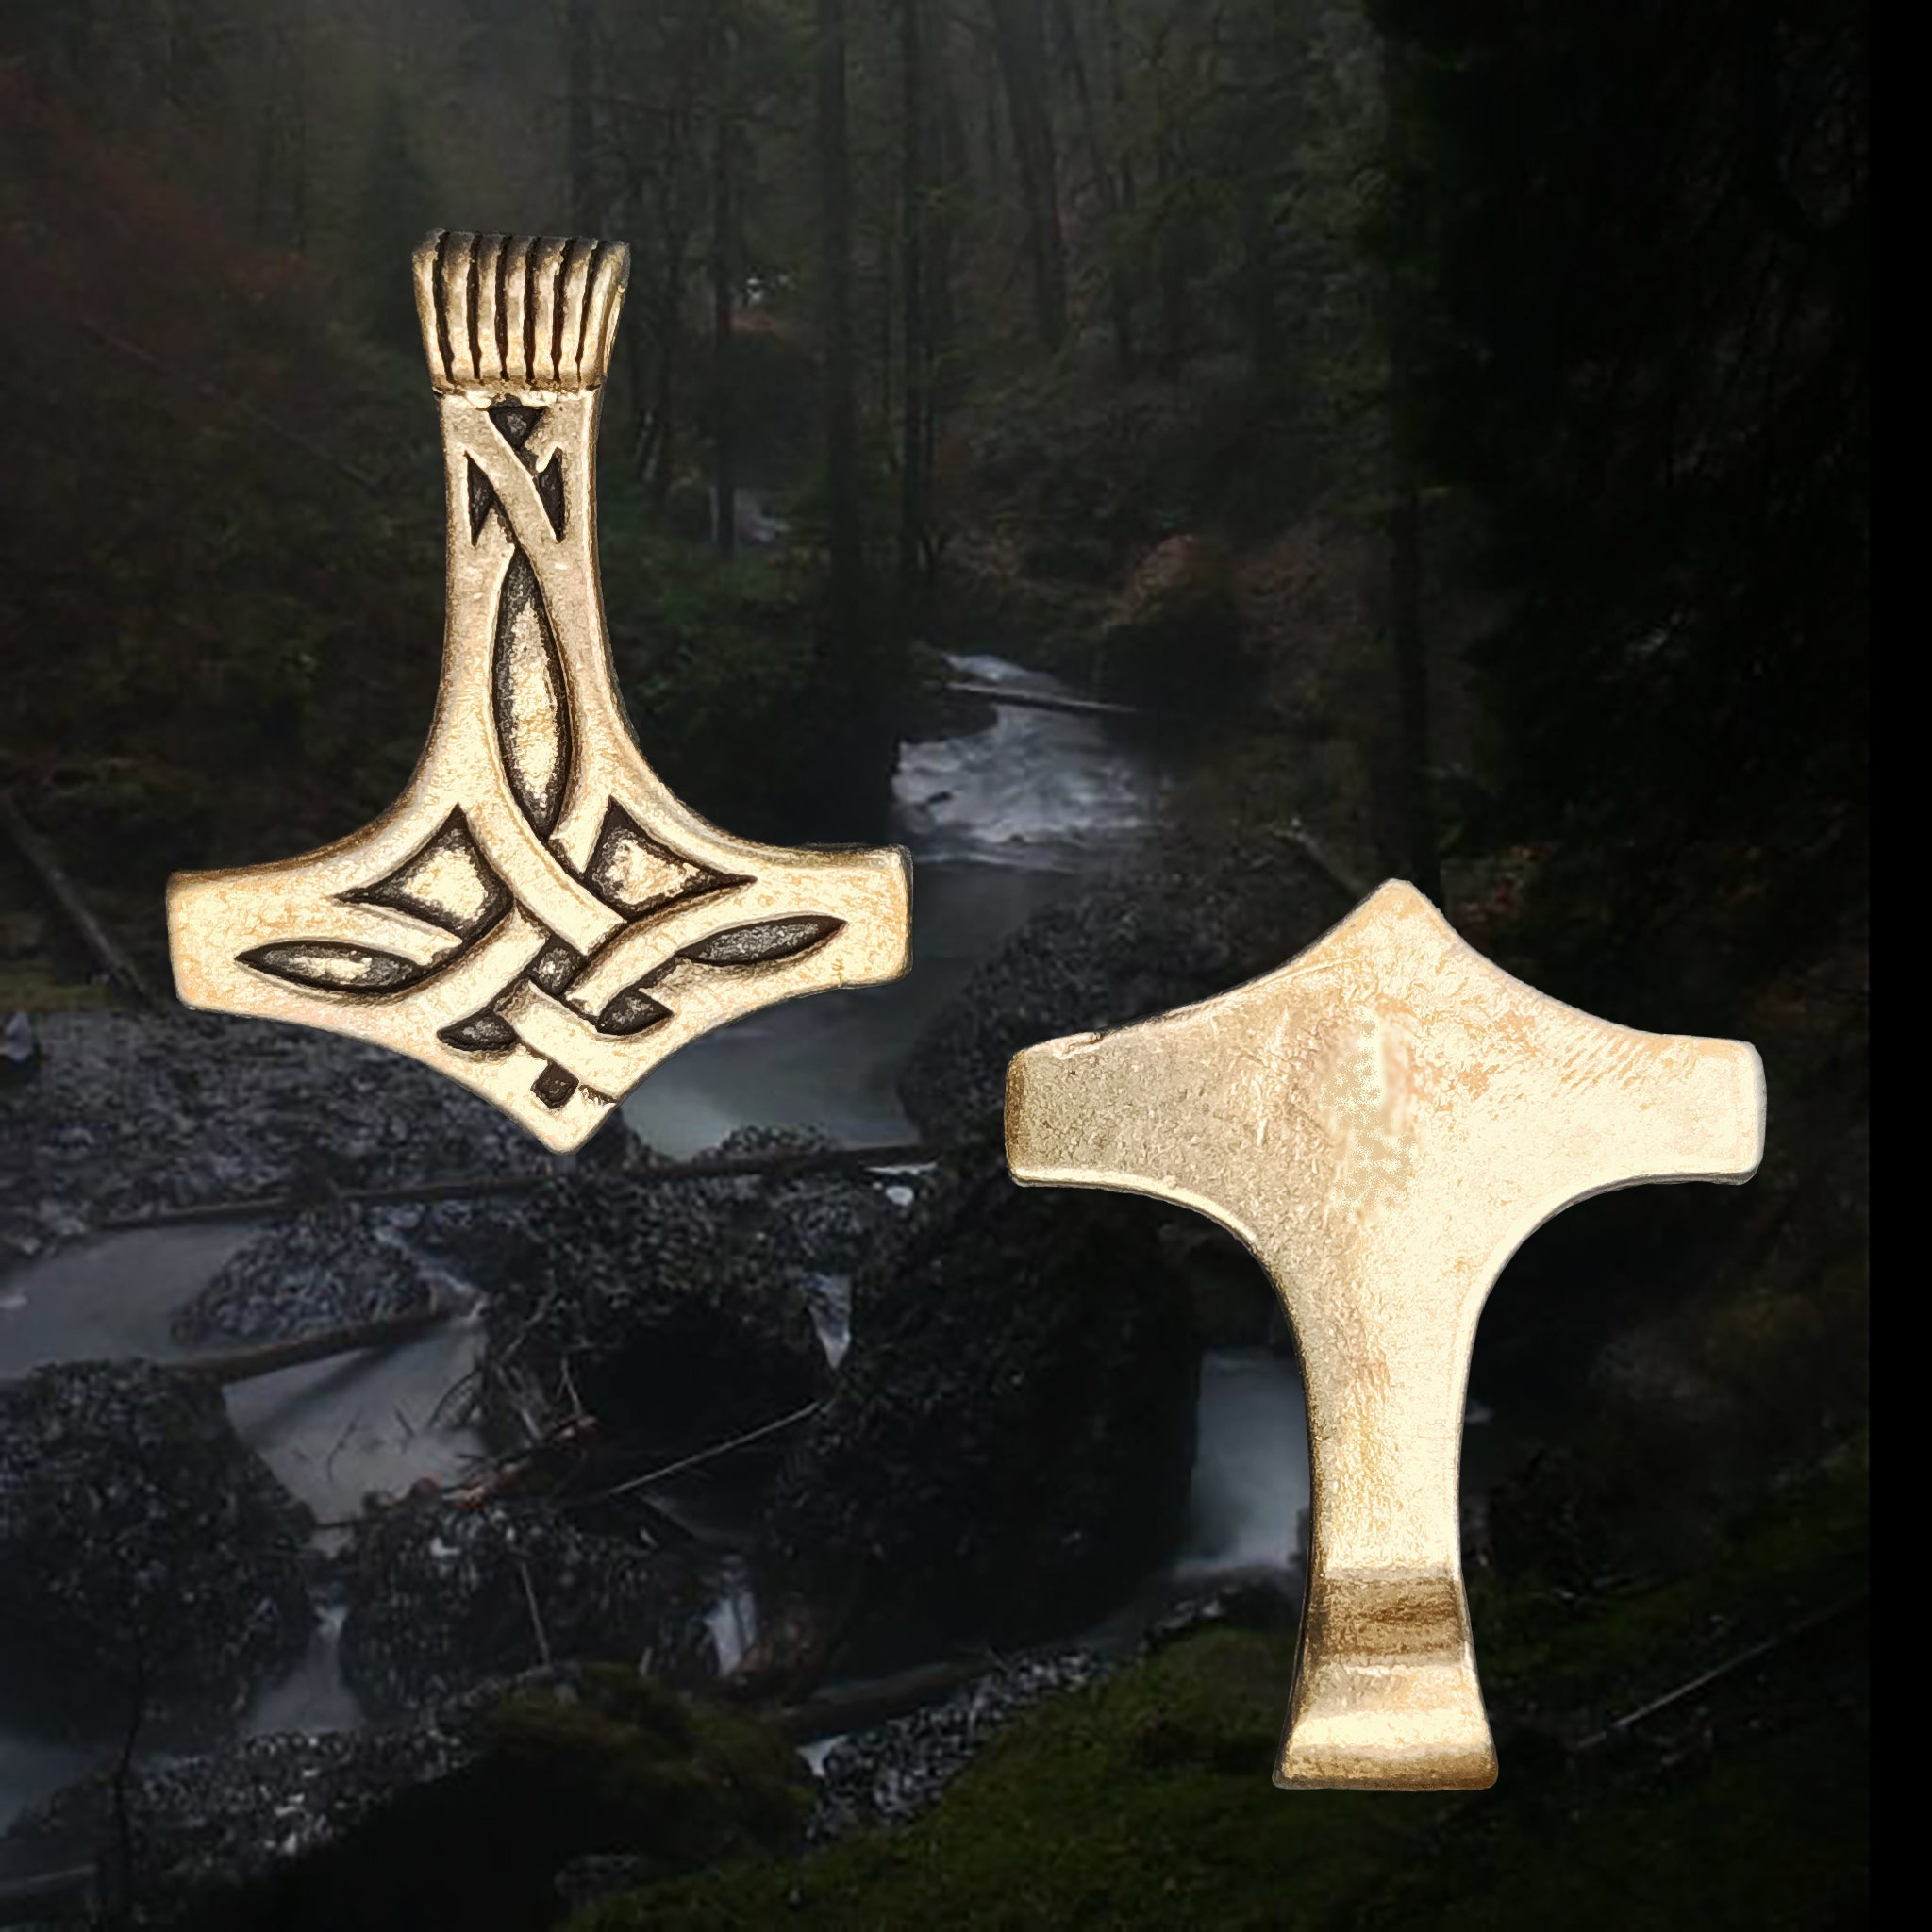 Bronze Thors Hammer Pendant with Knotwork Design - Front and Back